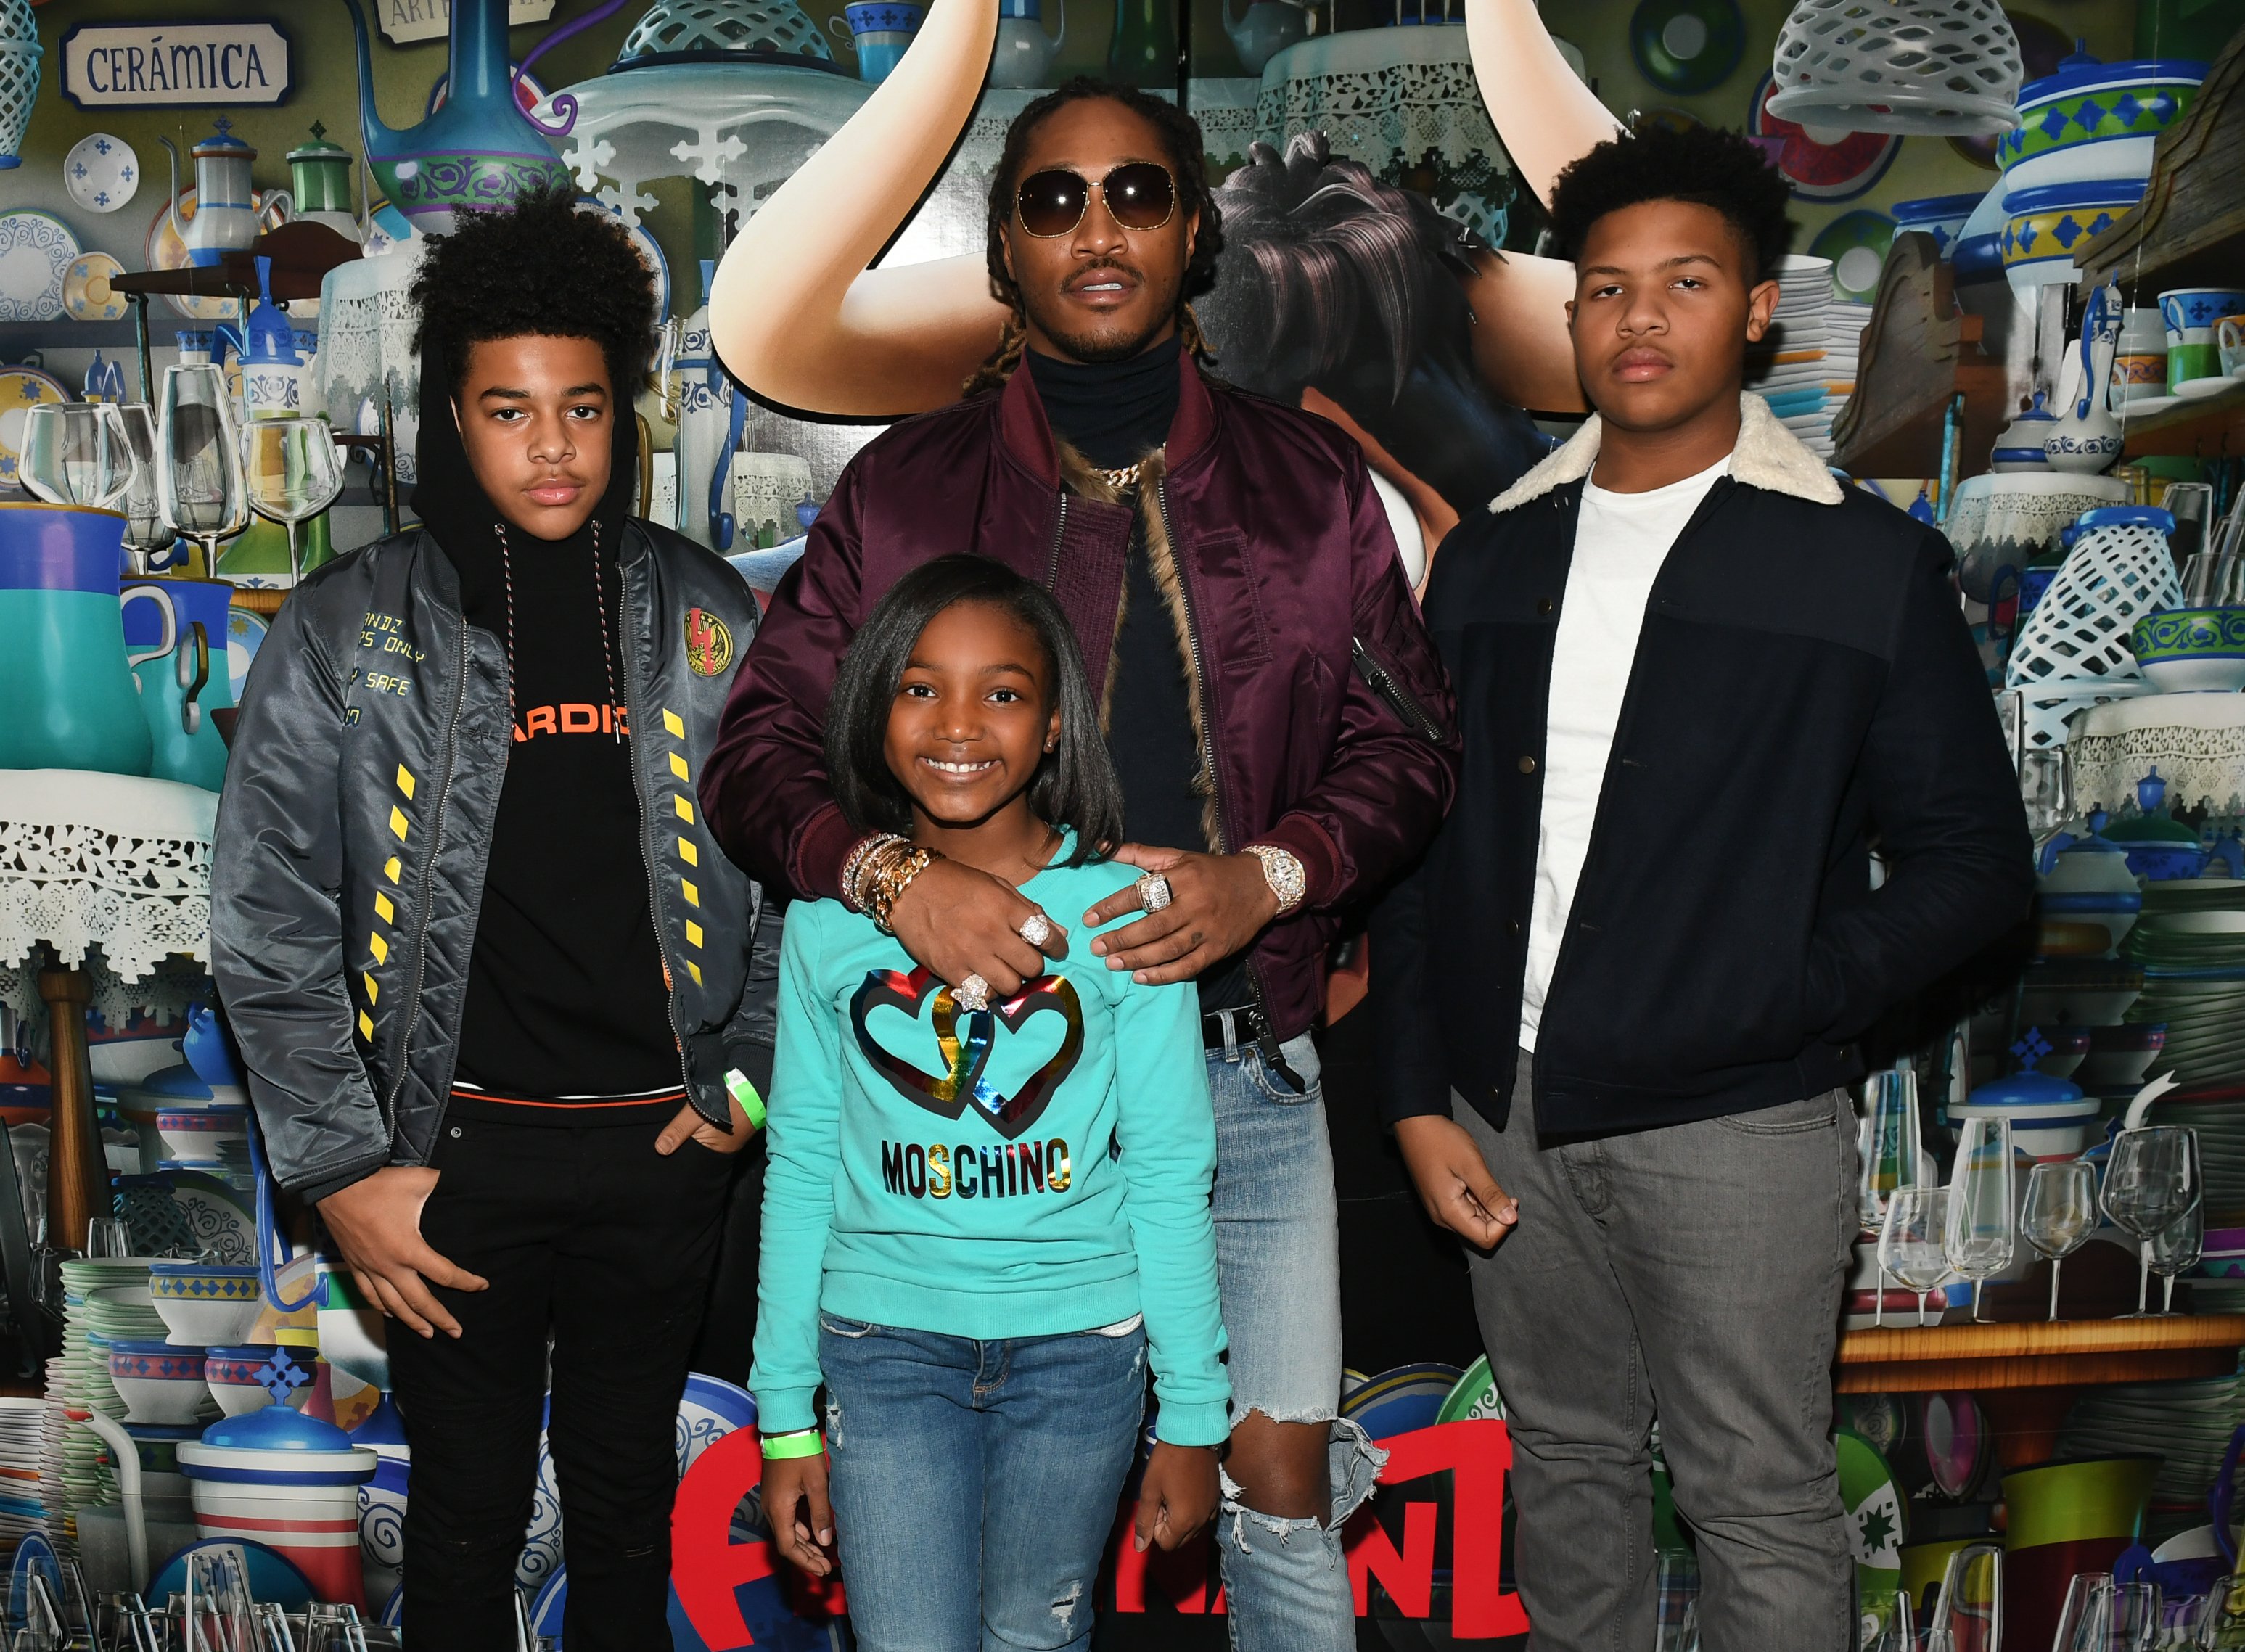 Future with his children during the "Ferdinand" screening at Regal Atlantic Station, Atlanta Georgia on December 9, 2017. | Source: Getty Images